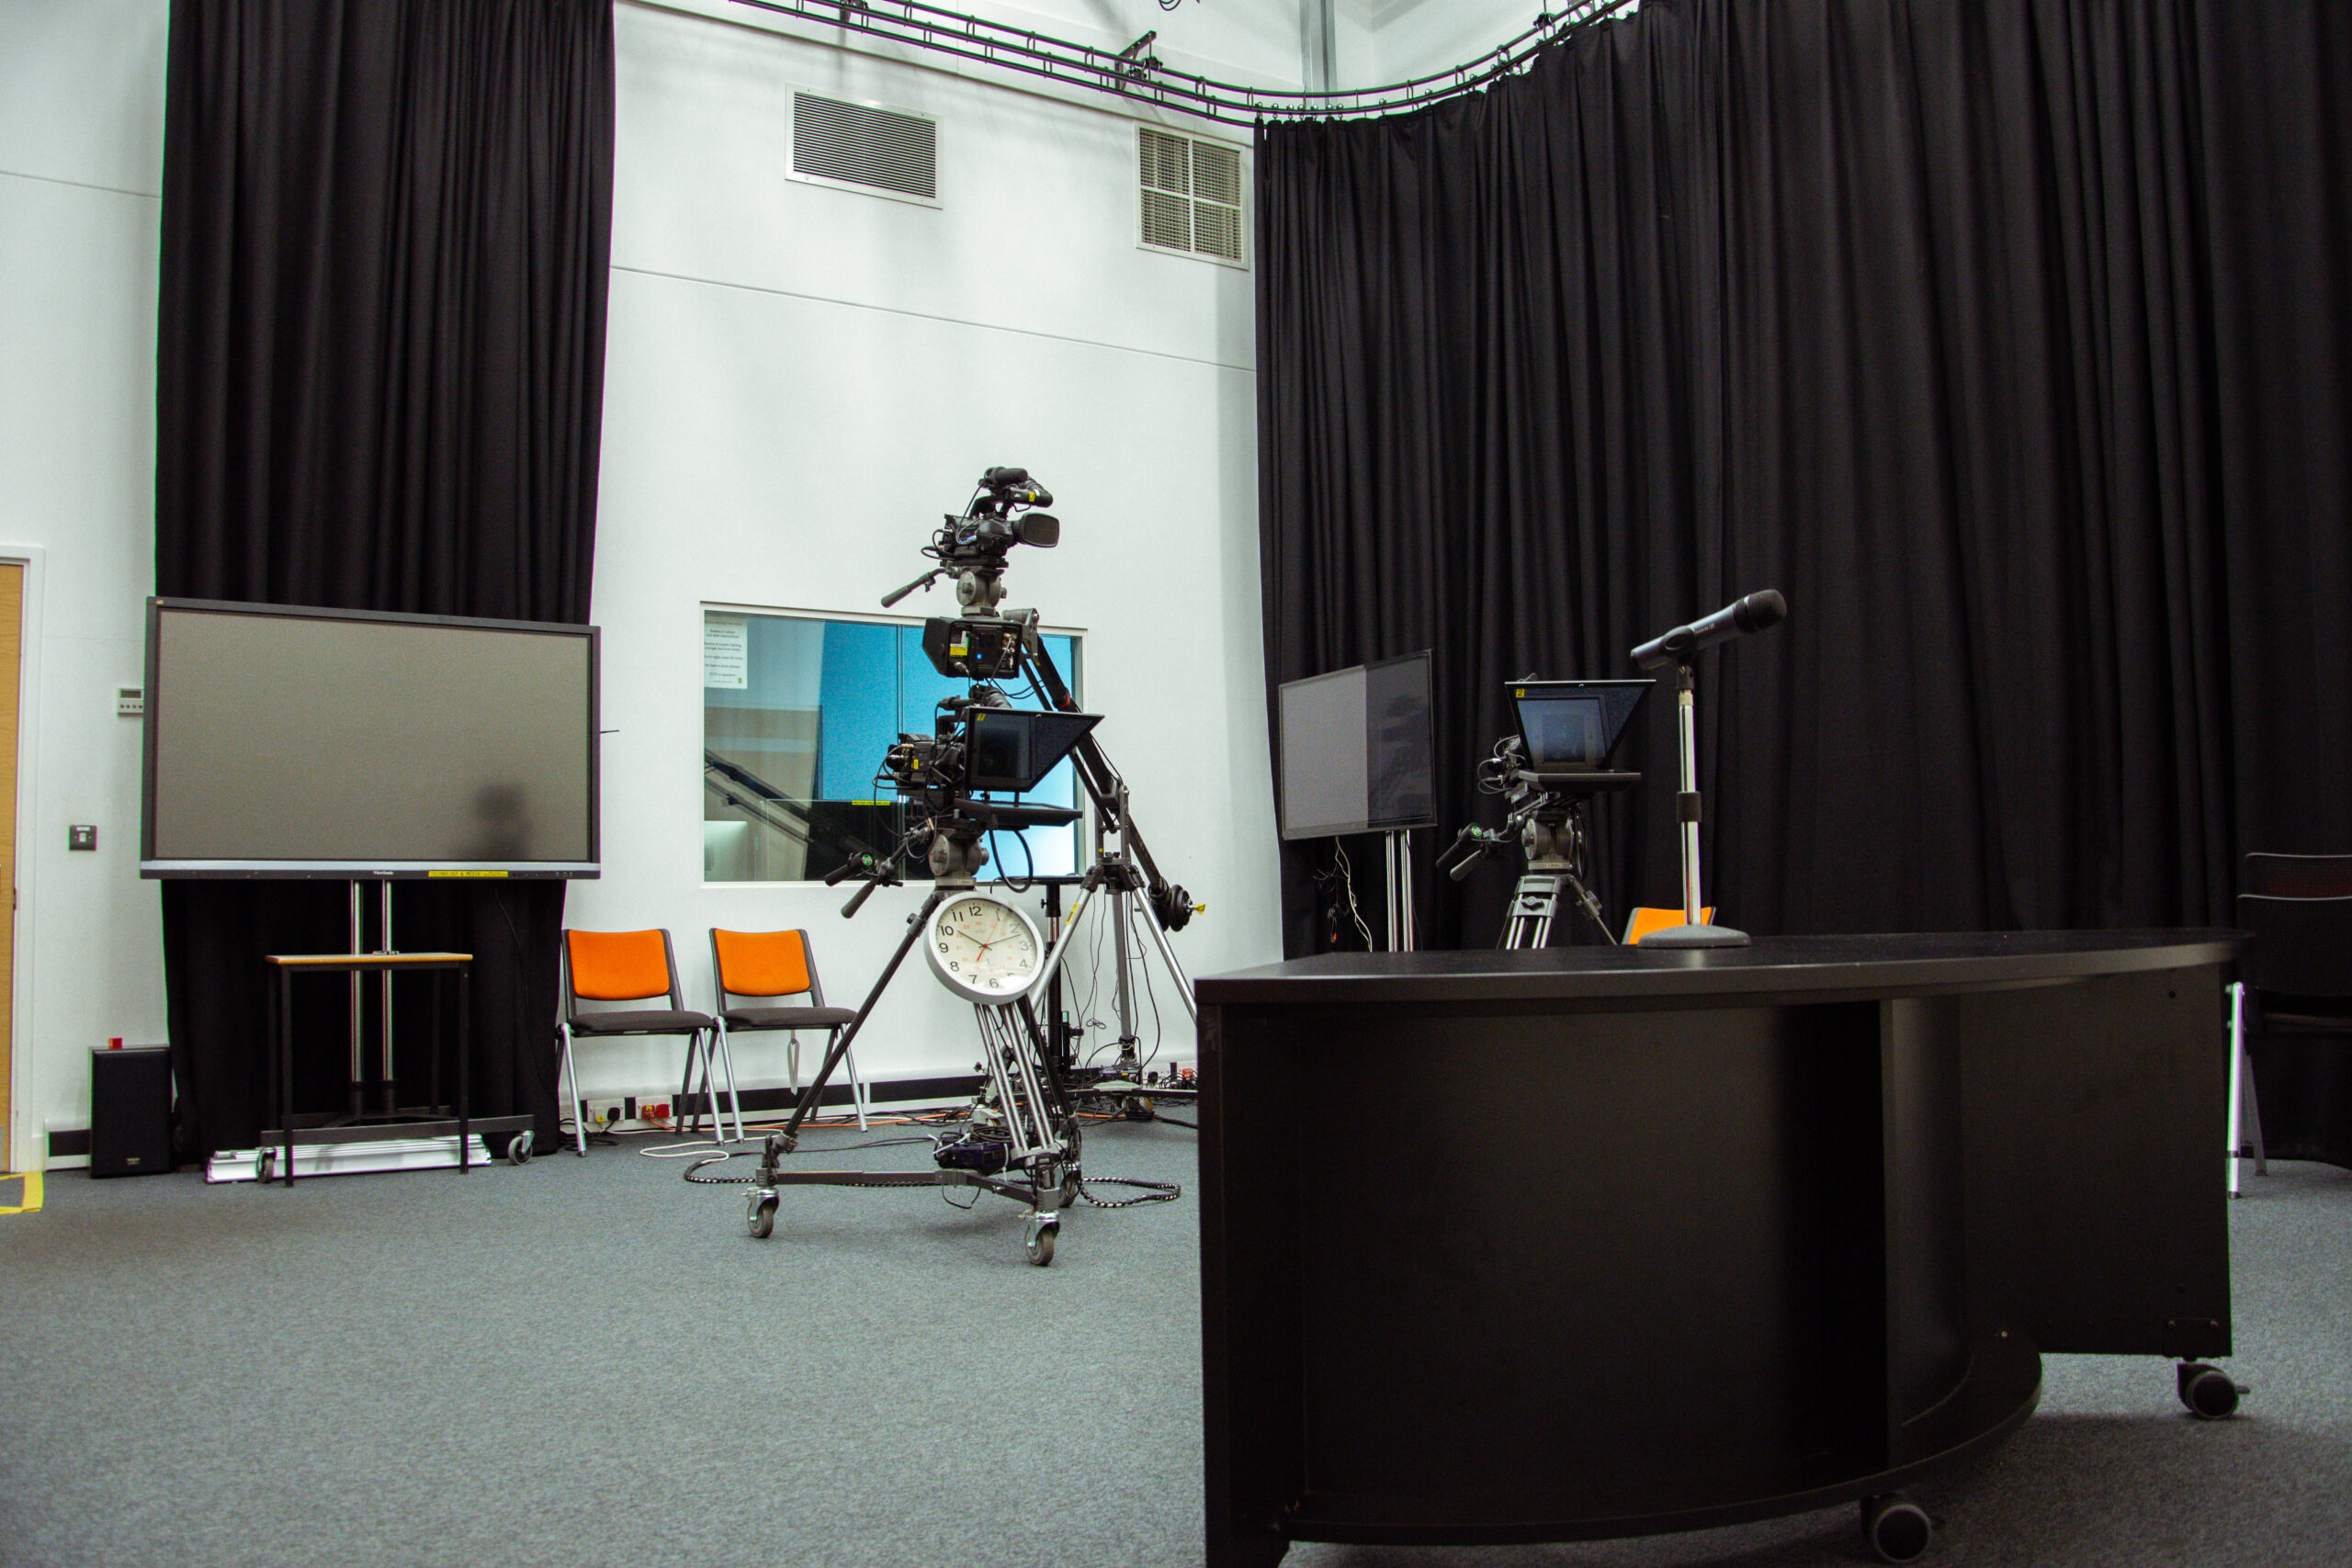 film and media facilities including television camera equipment, a microphone and television screens